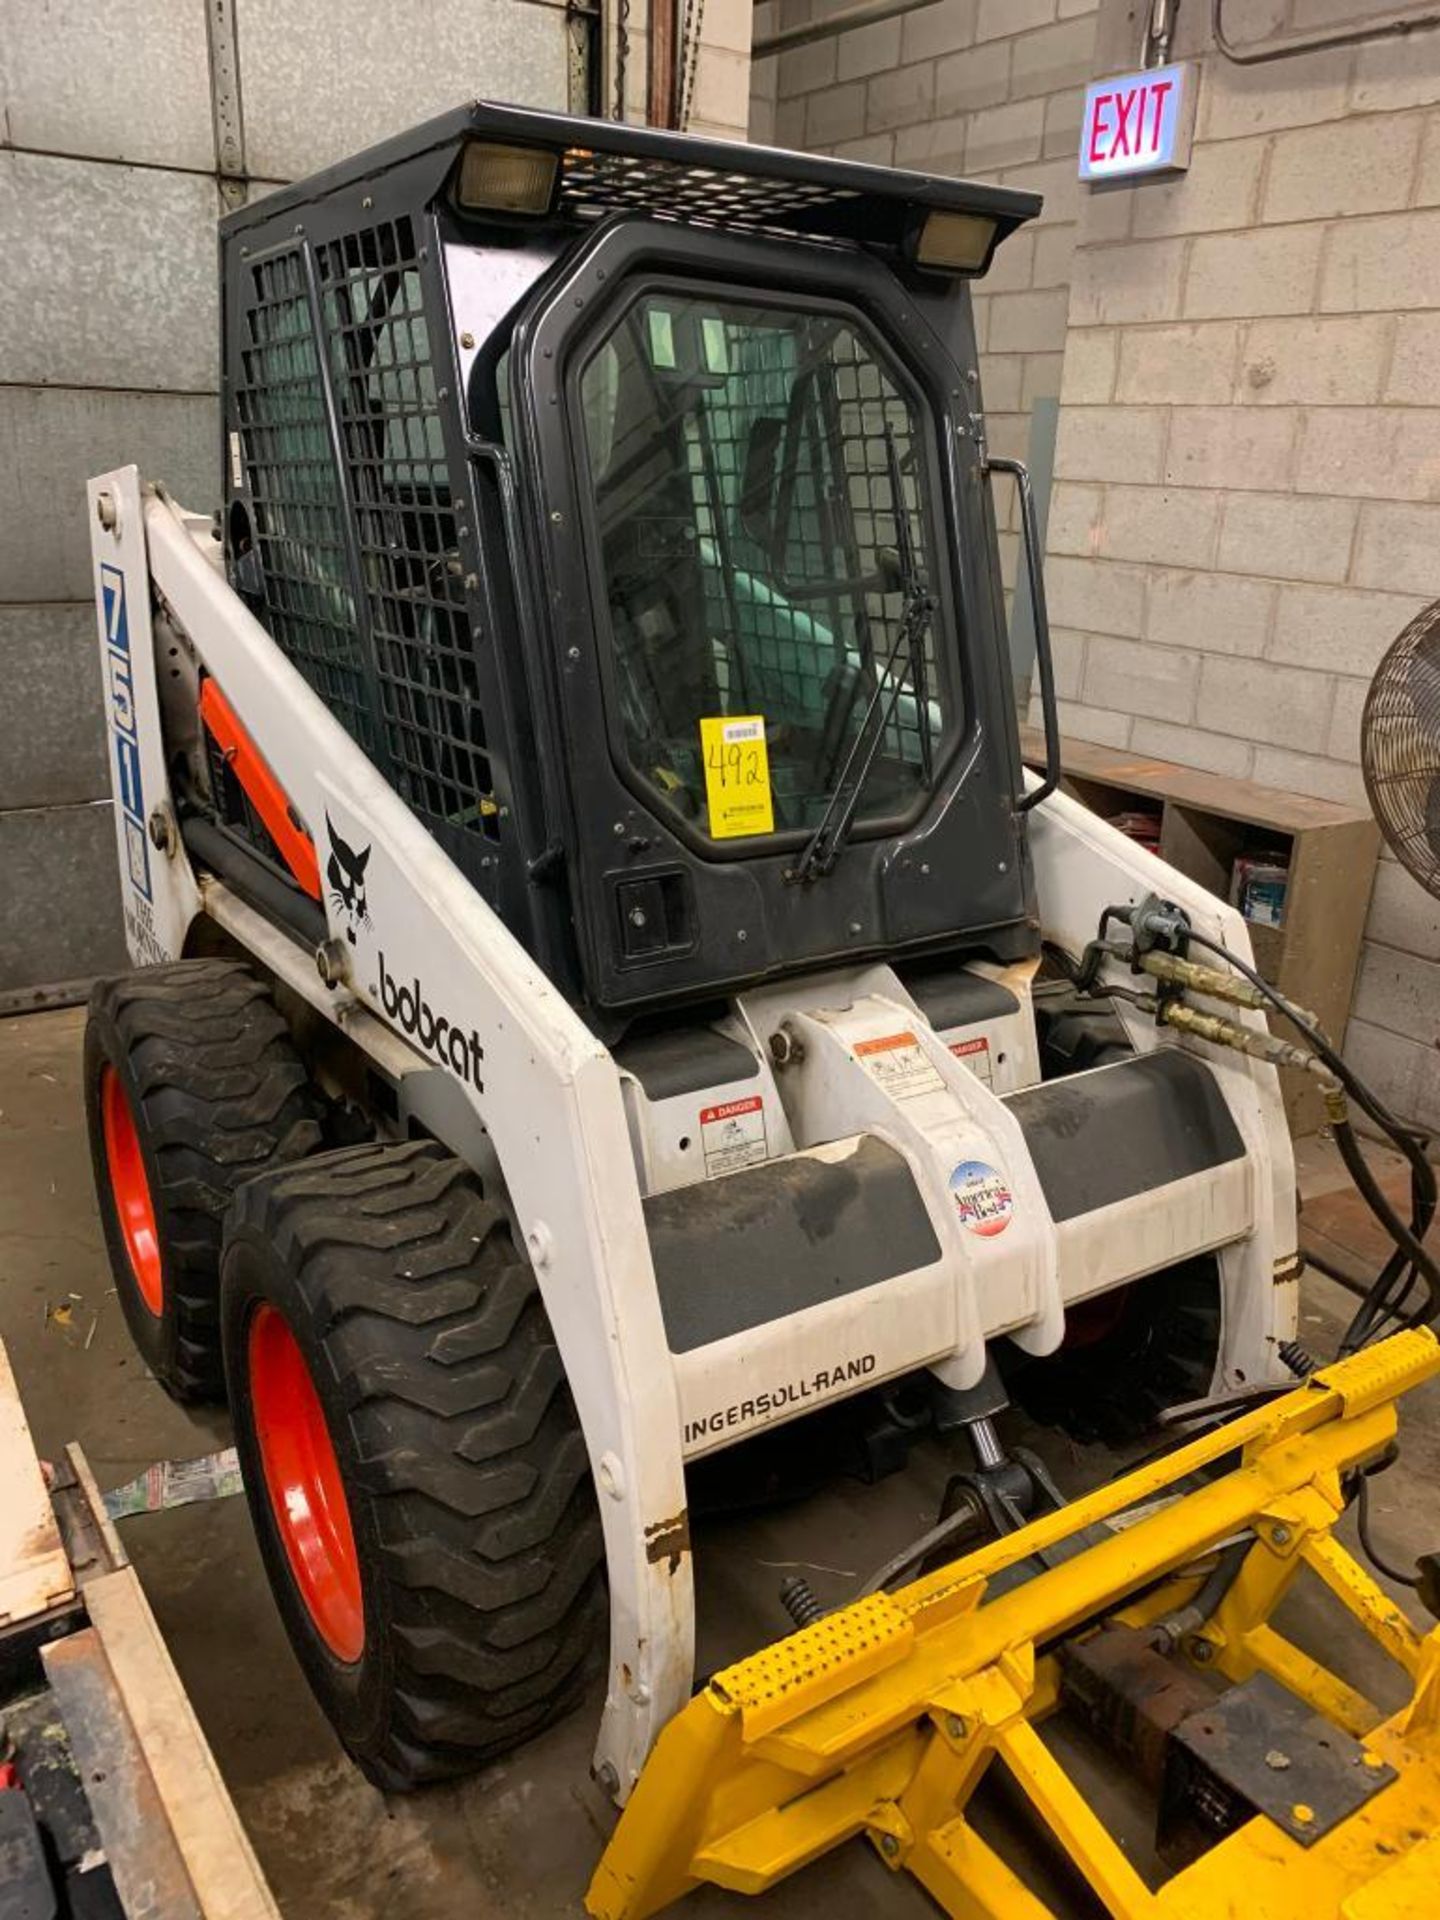 1997 Bobcat Skid Steer 751, Pin No. 514713829 (This Machine Does Not Come w/ Snowblower, it Will Hav